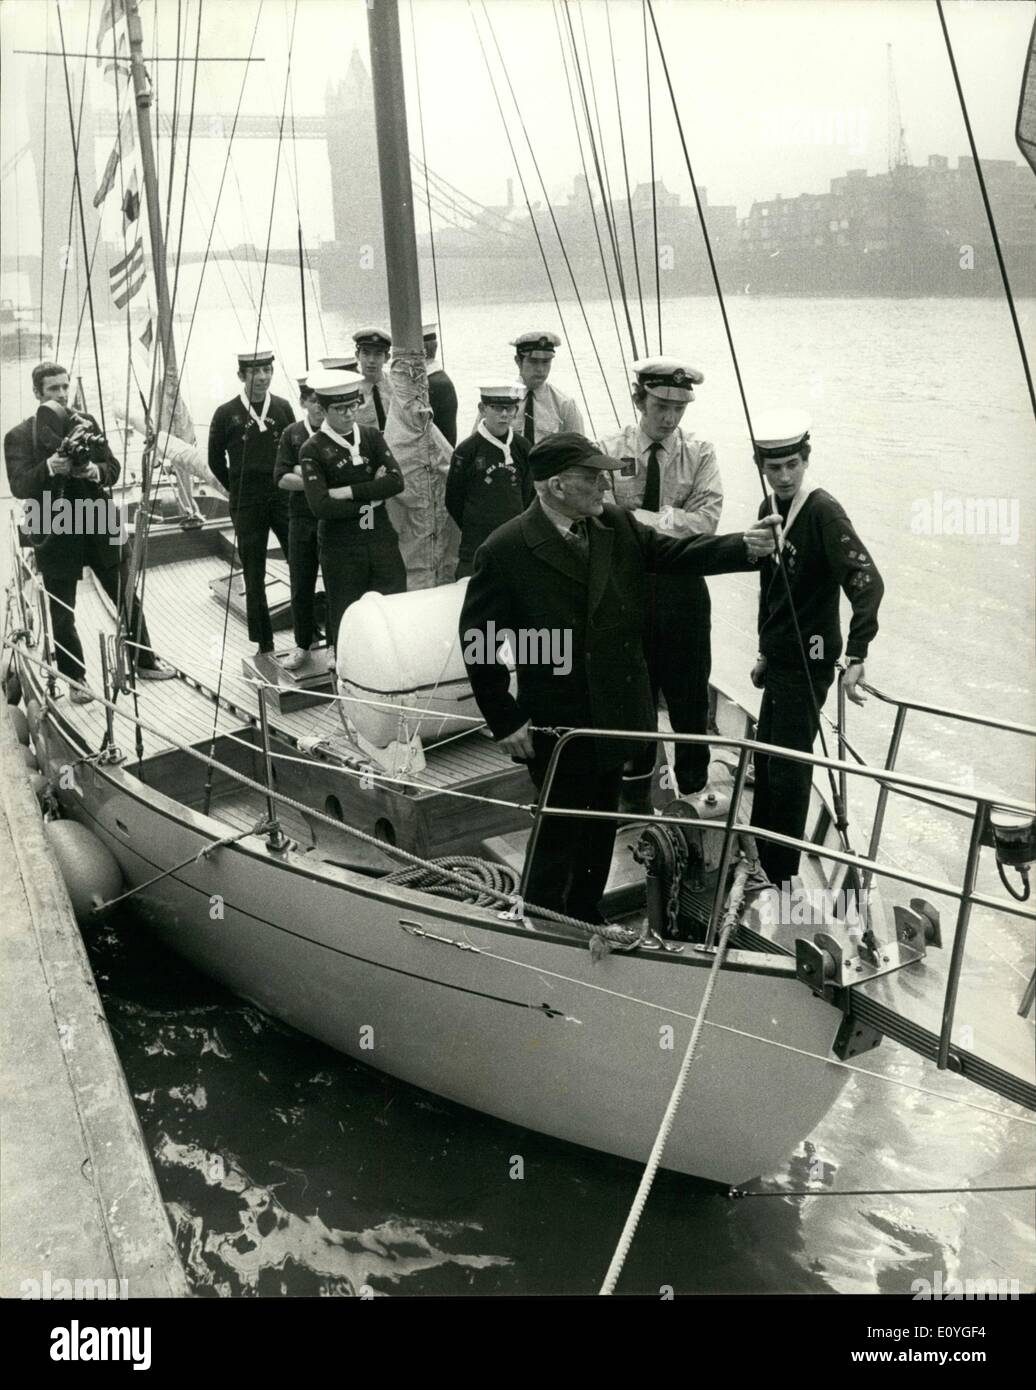 Apr. 10, 1970 - April 10th, 1970 Sir Francis Chichester aboard the Seven Kings. Sir Francis Chichester, the yachtsman, aboard the Seven Kings, an &pound;18,000, 44&frac12; ft. ketch, with boys of the 4th Seven Kings Sea Scouts who helped build her, at Tower Pier yesterday. It took 7 years to build the 16-ton, 8-berth ocean going yacht in a field near the home of the troop's scoutmaster, Mr. Derek Williams, 37, a Woodford, Essex, schoolmaster. Stock Photo